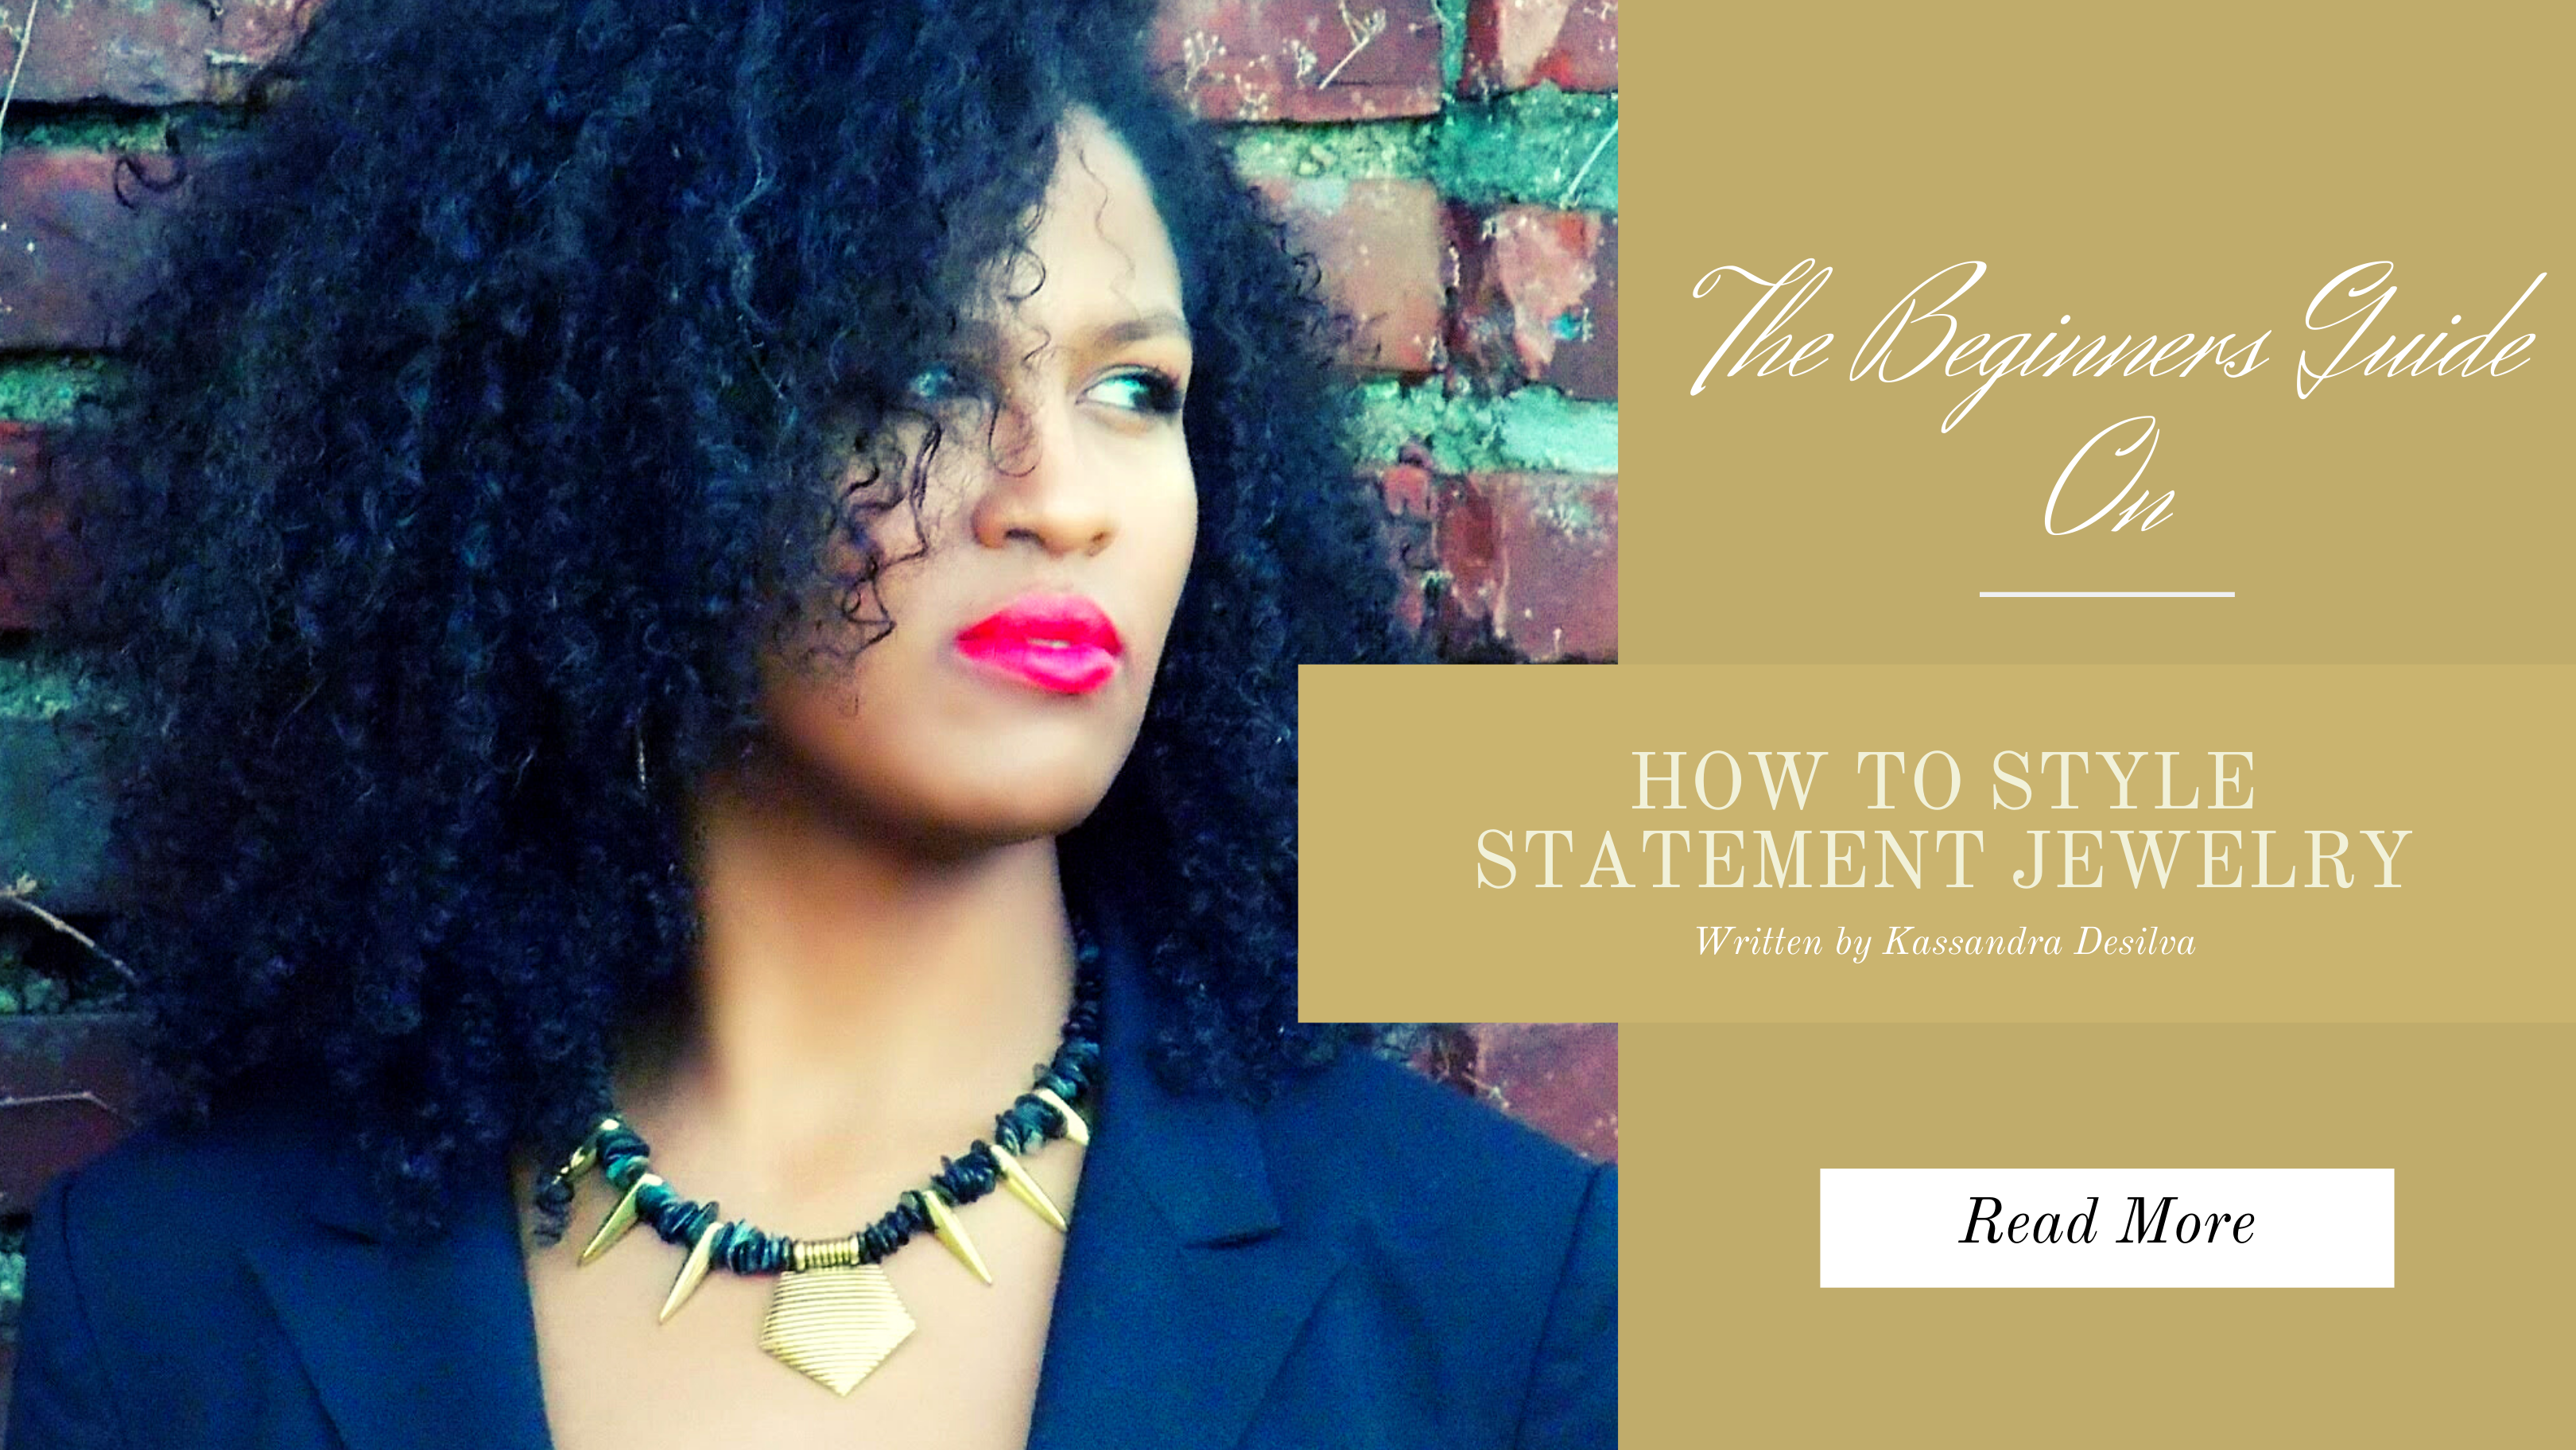 Beginner's Guide On How To Style Statement Jewelry